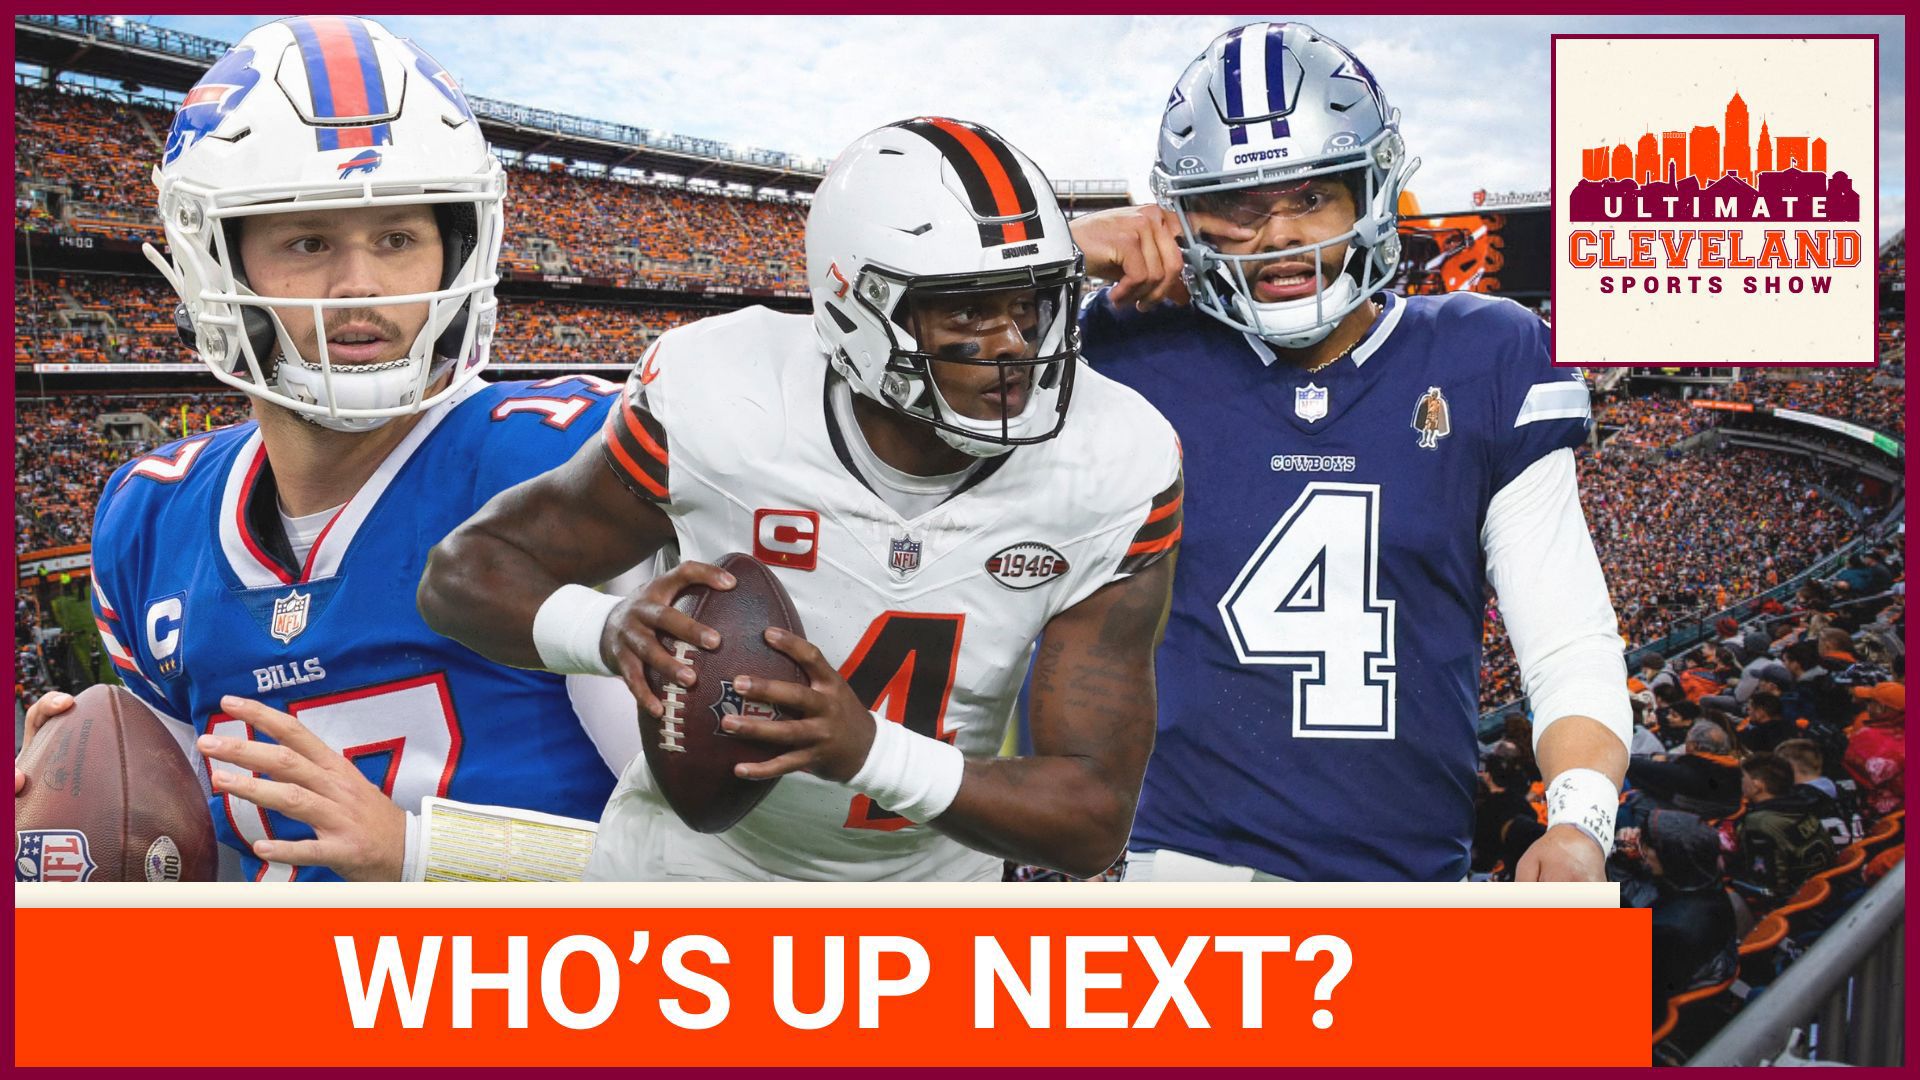 Can Deshaun Watson be the next NFL QB to win his first Super Bowl? The Cleveland Browns are arguably in the hardest division in football...